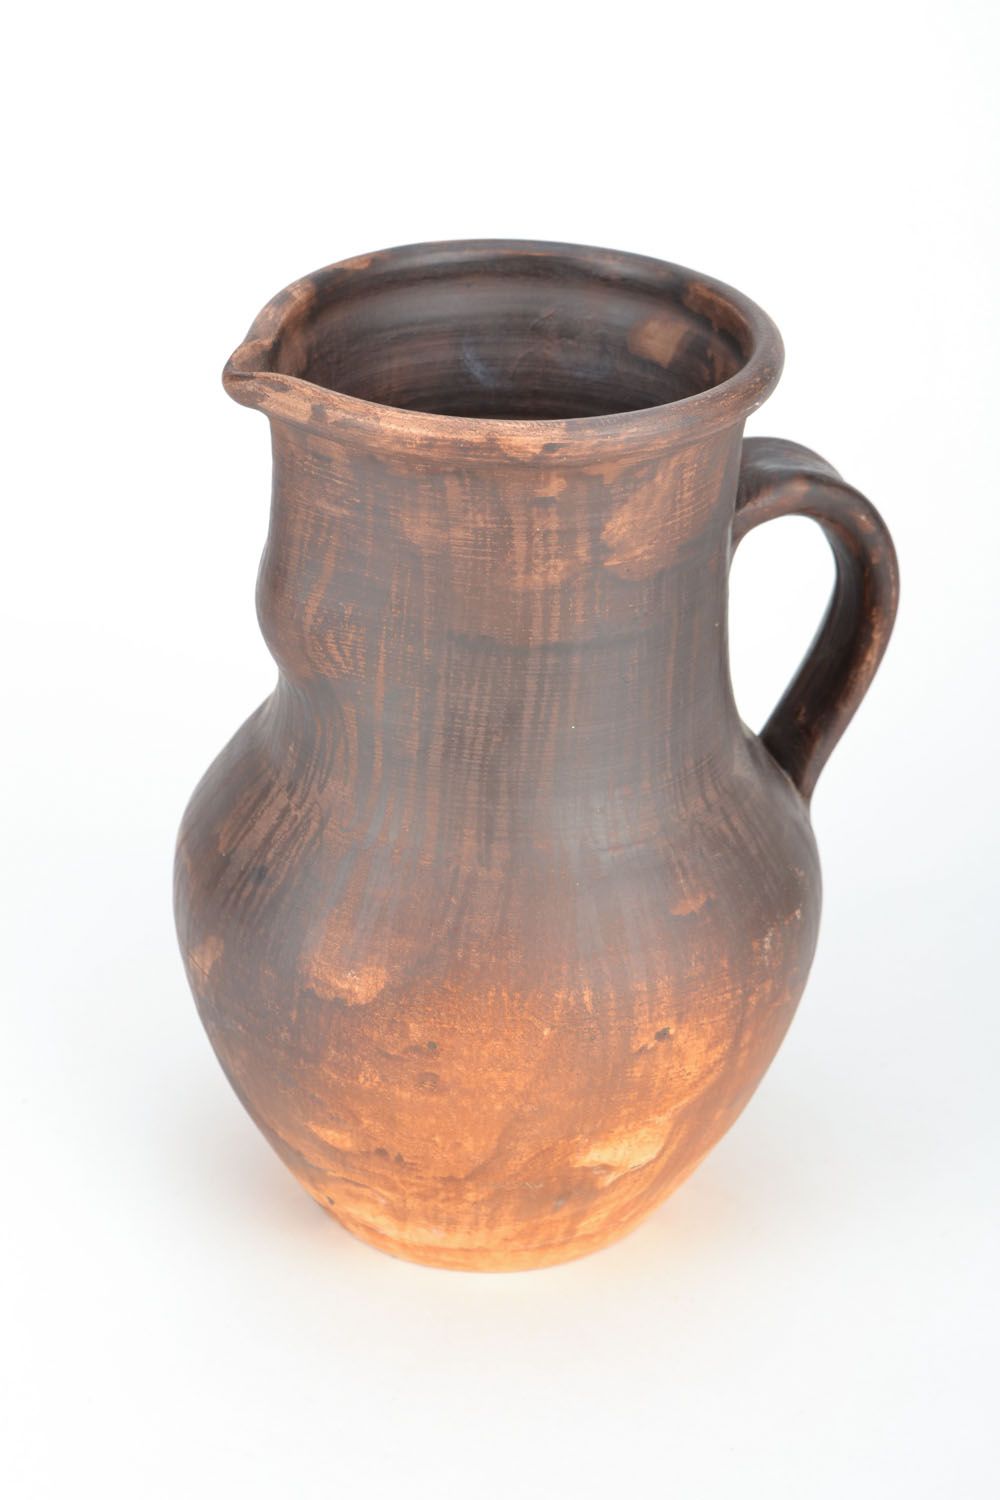 60 oz lead-free clay old fashion style mil pitcher in brown color 1,5 lb photo 3